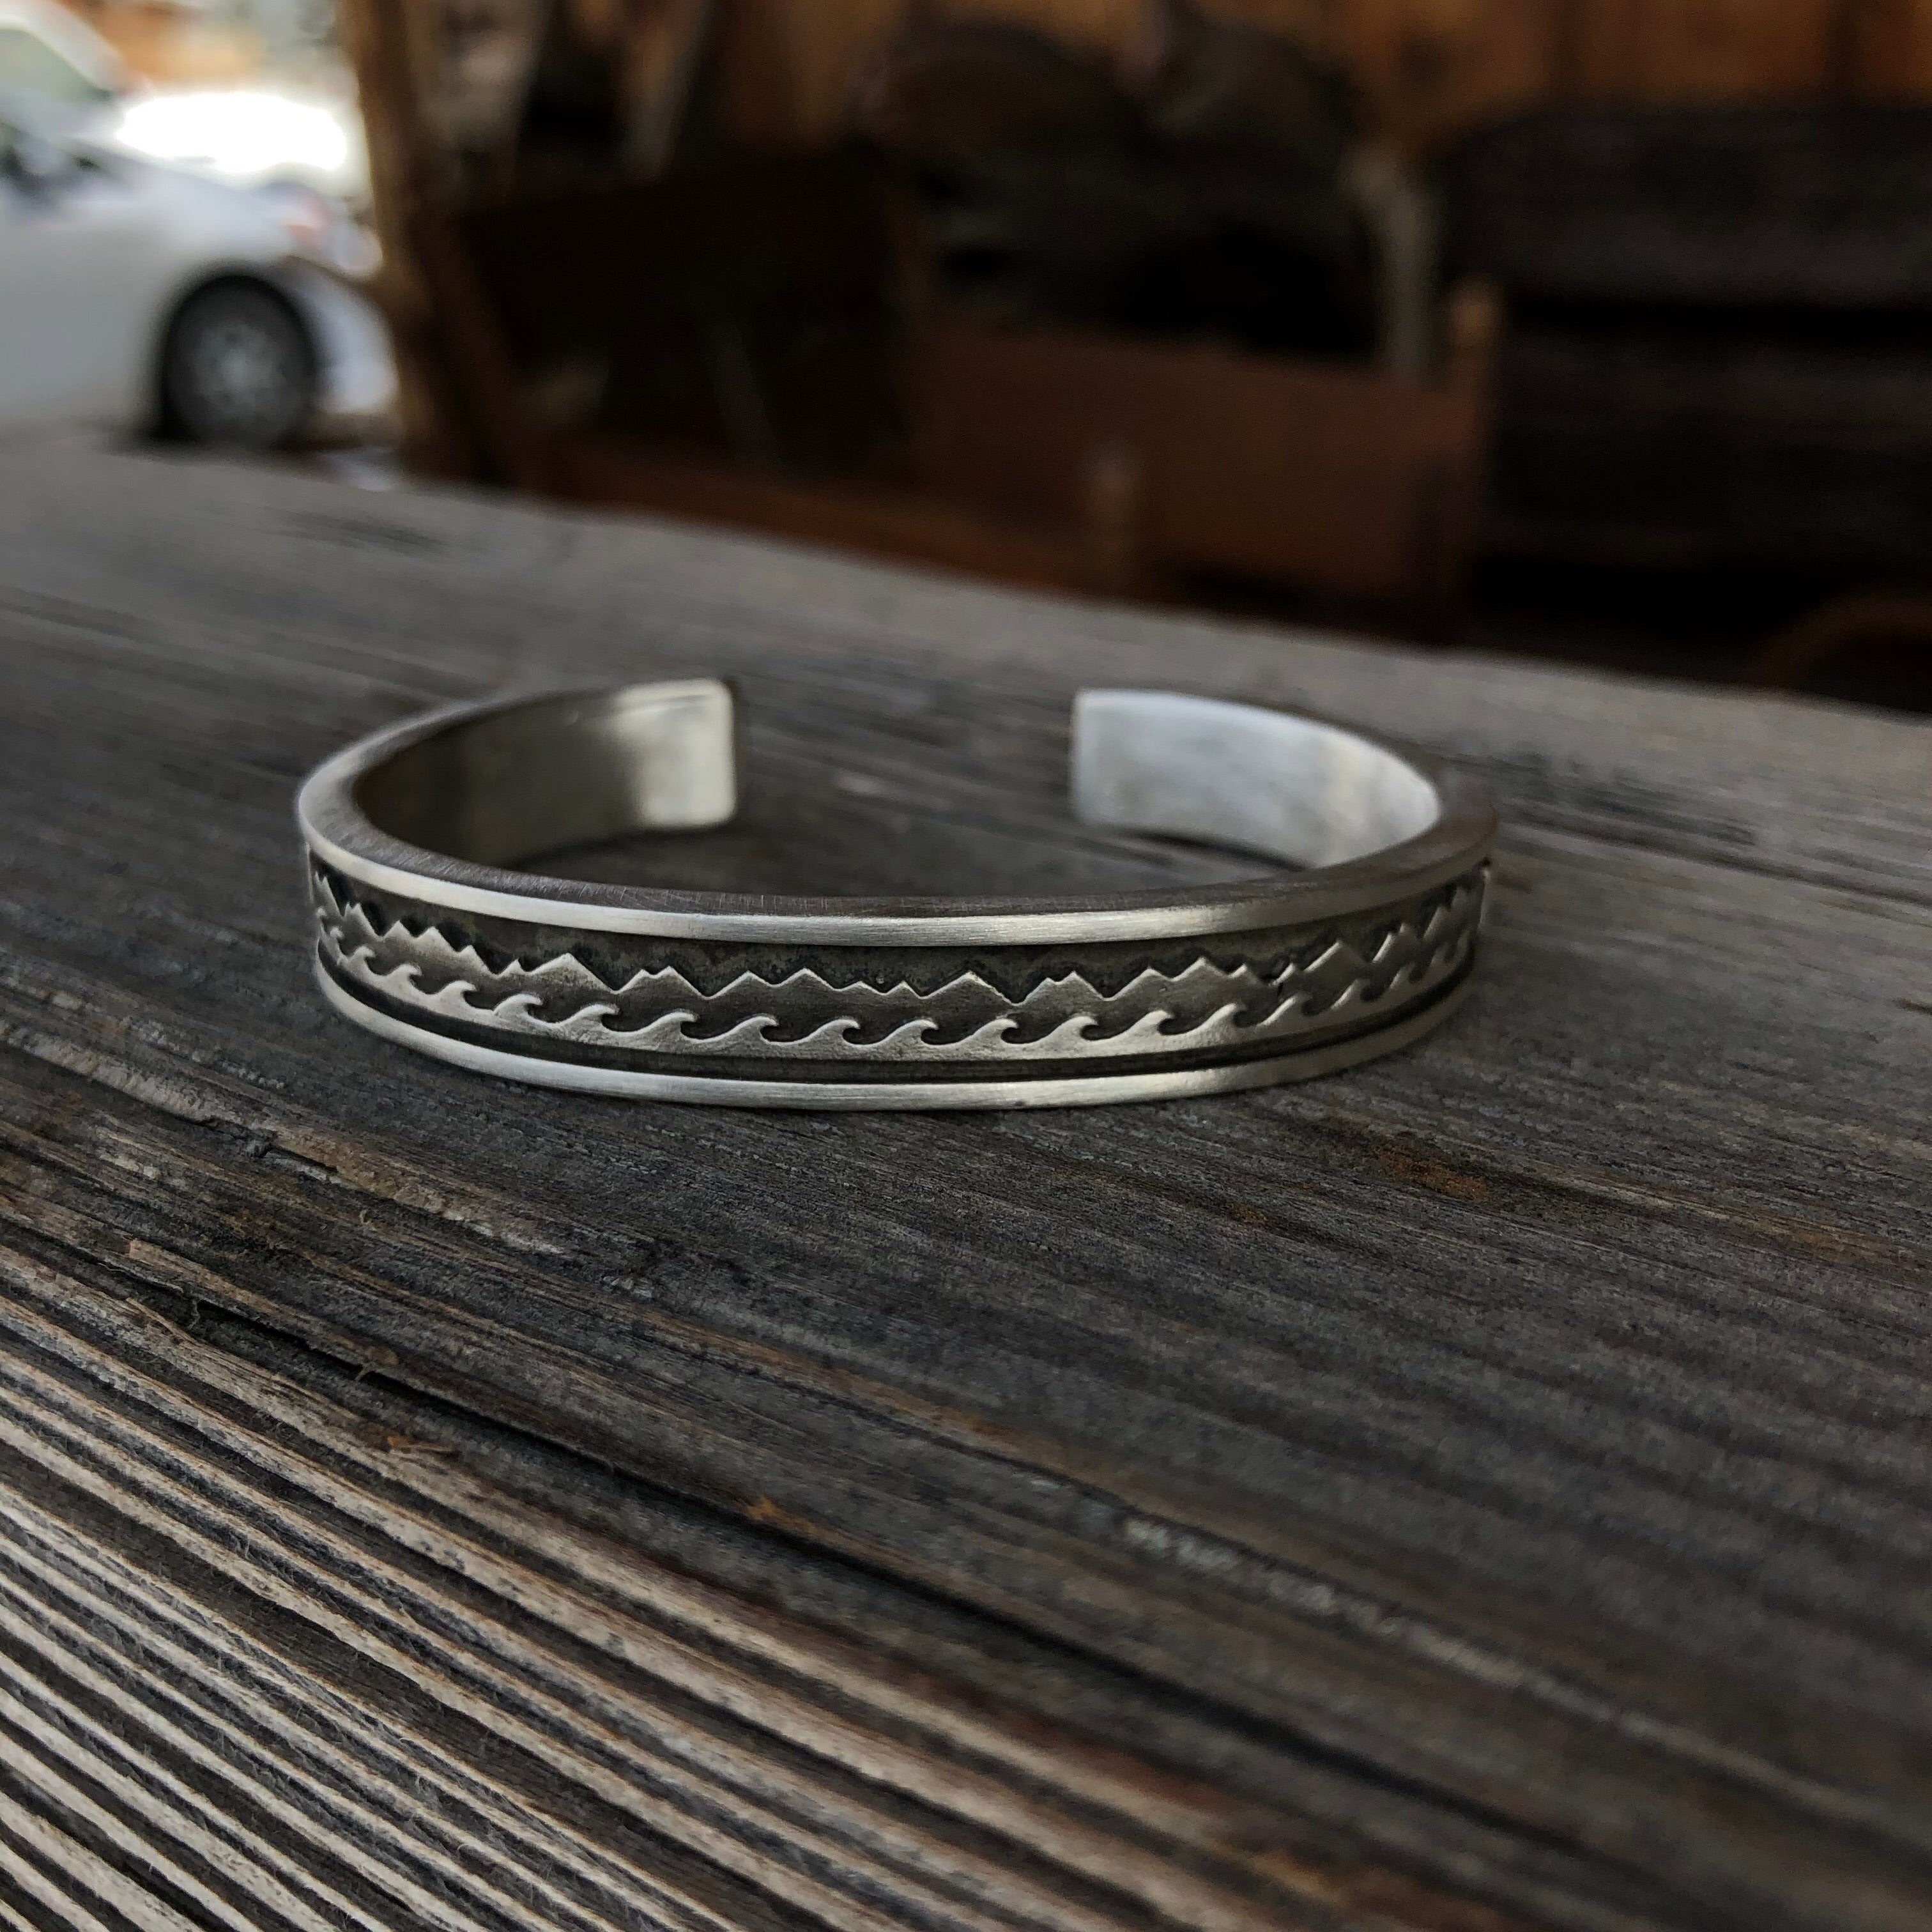 Mountain and wave cuff bracelet